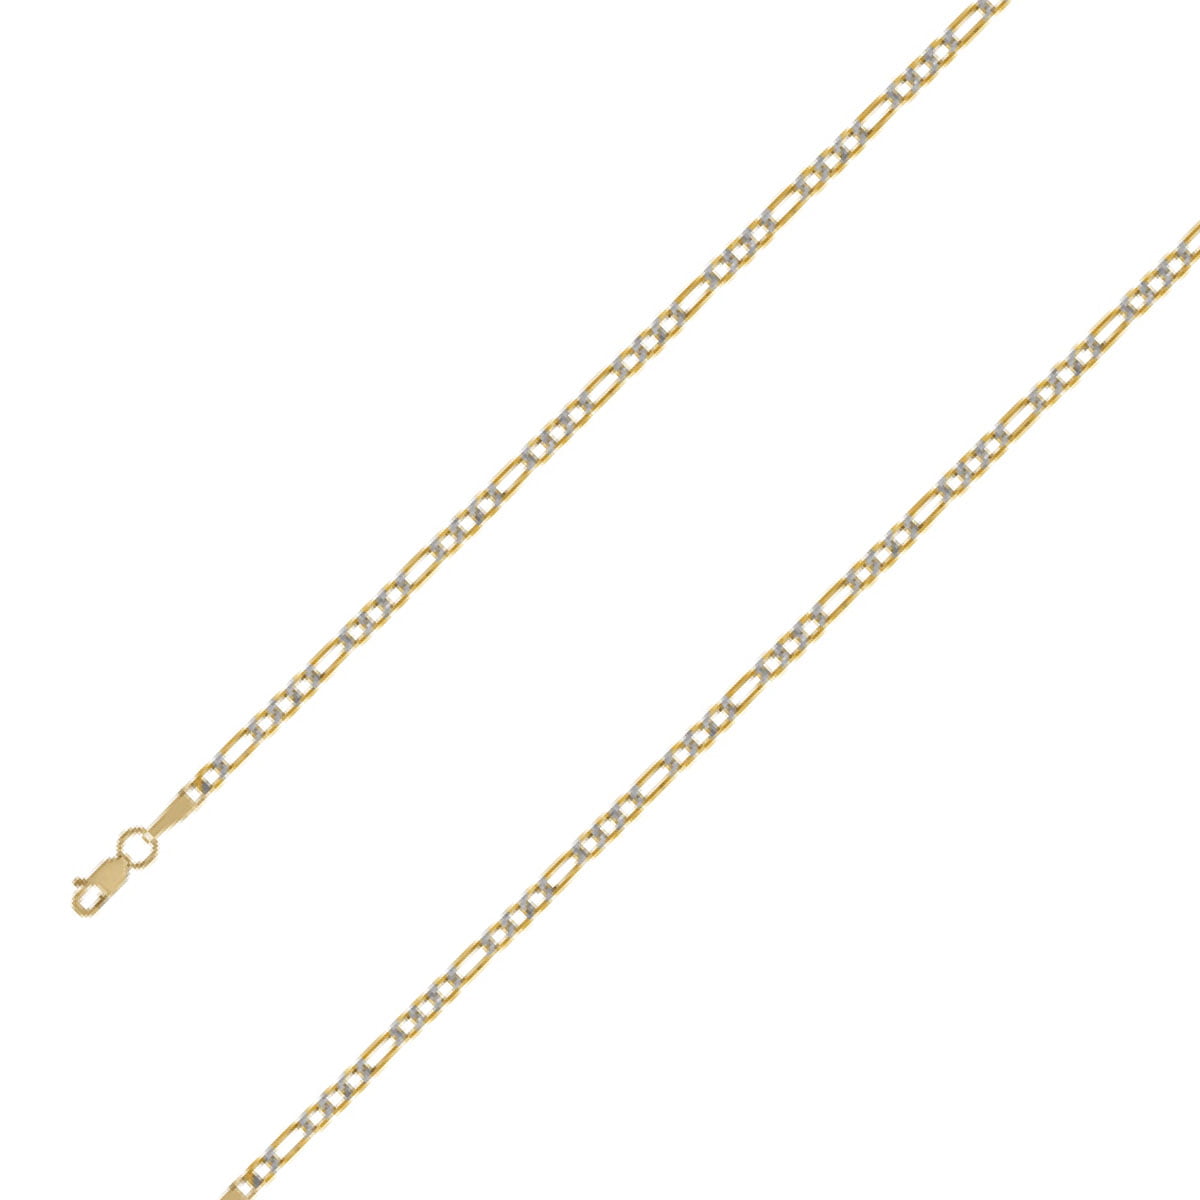 10K Yellow Gold 2.5mm Figaro Chain Necklace Lobster Clasp